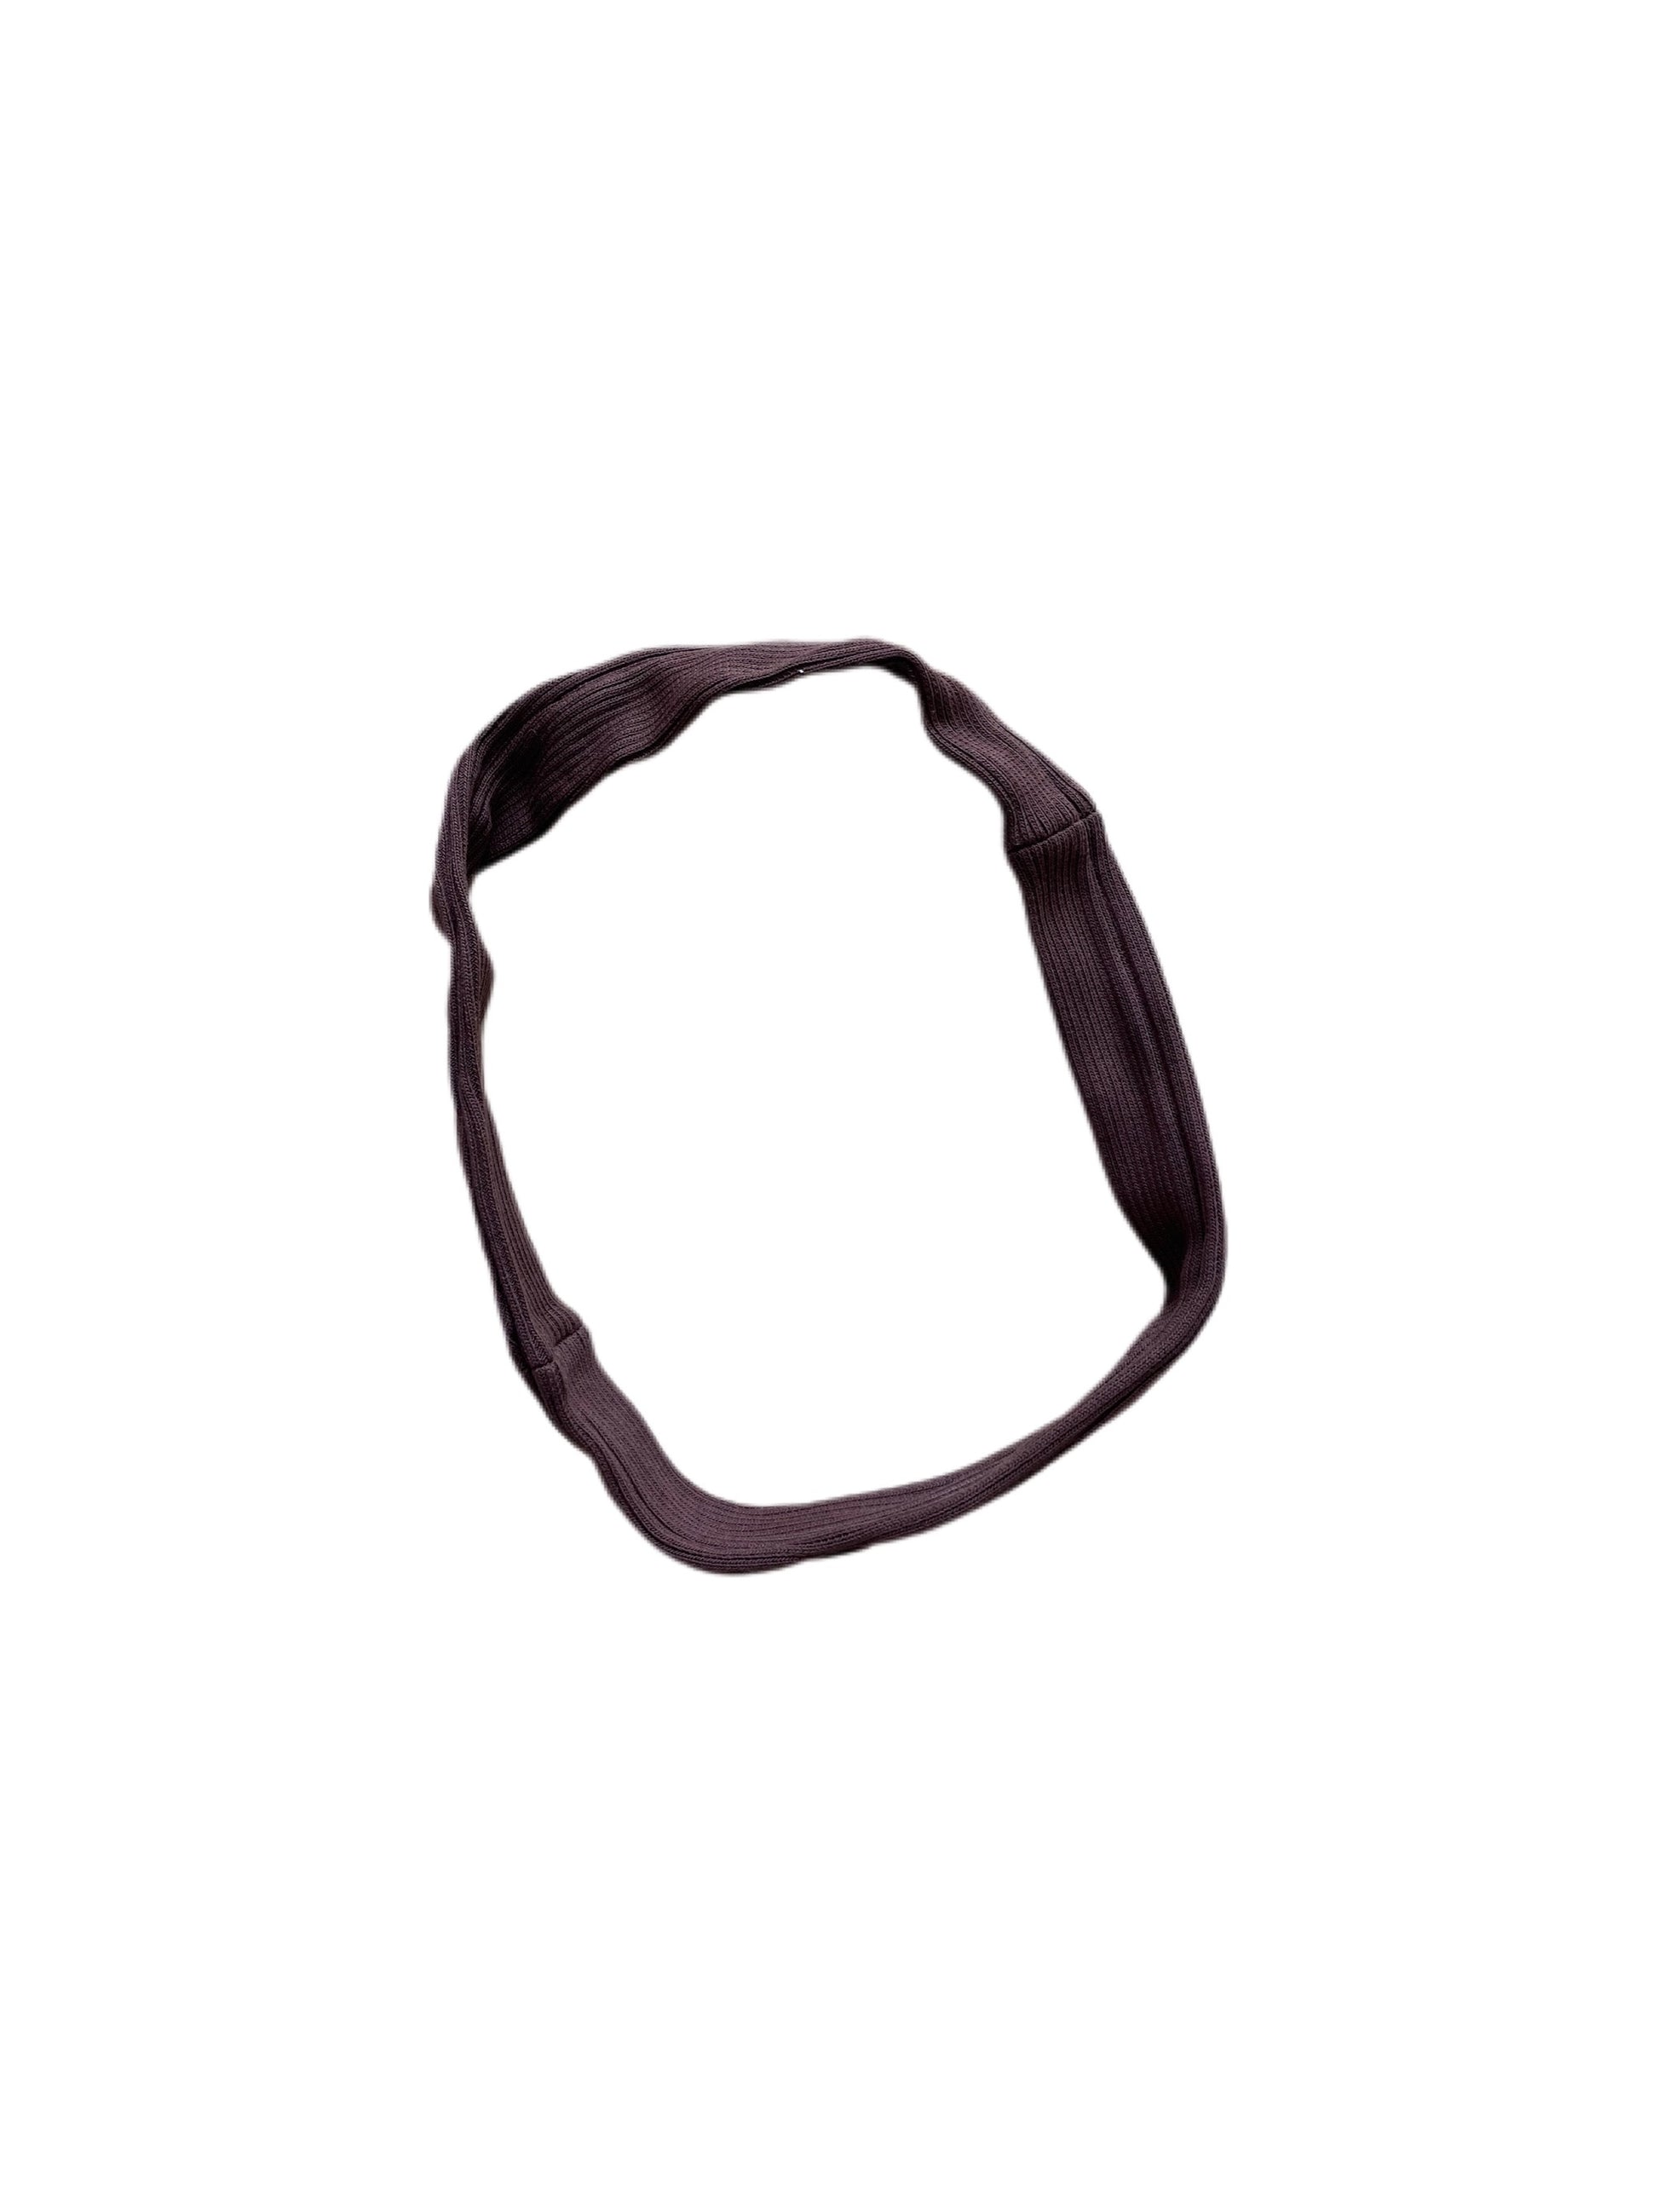 Ribbed Brown Headband Product Front | Beatrice Bayliss